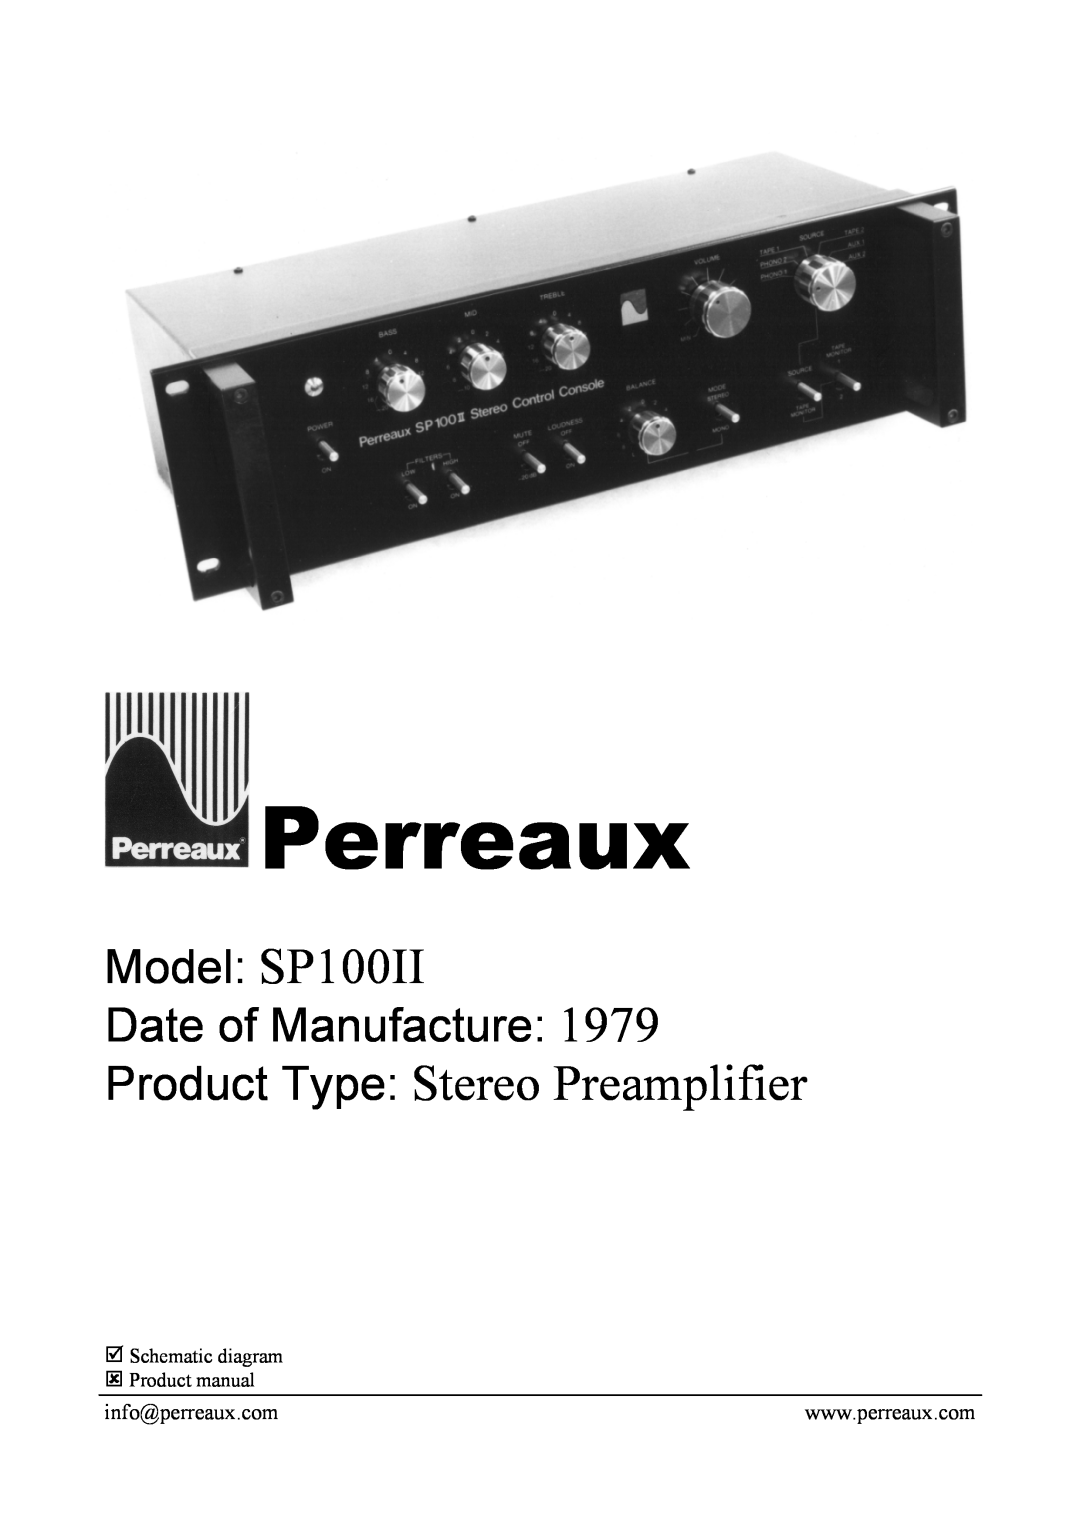 Perreaux manual Perreaux, Product Type Stereo Preamplifier, Model SP100II Date of Manufacture 